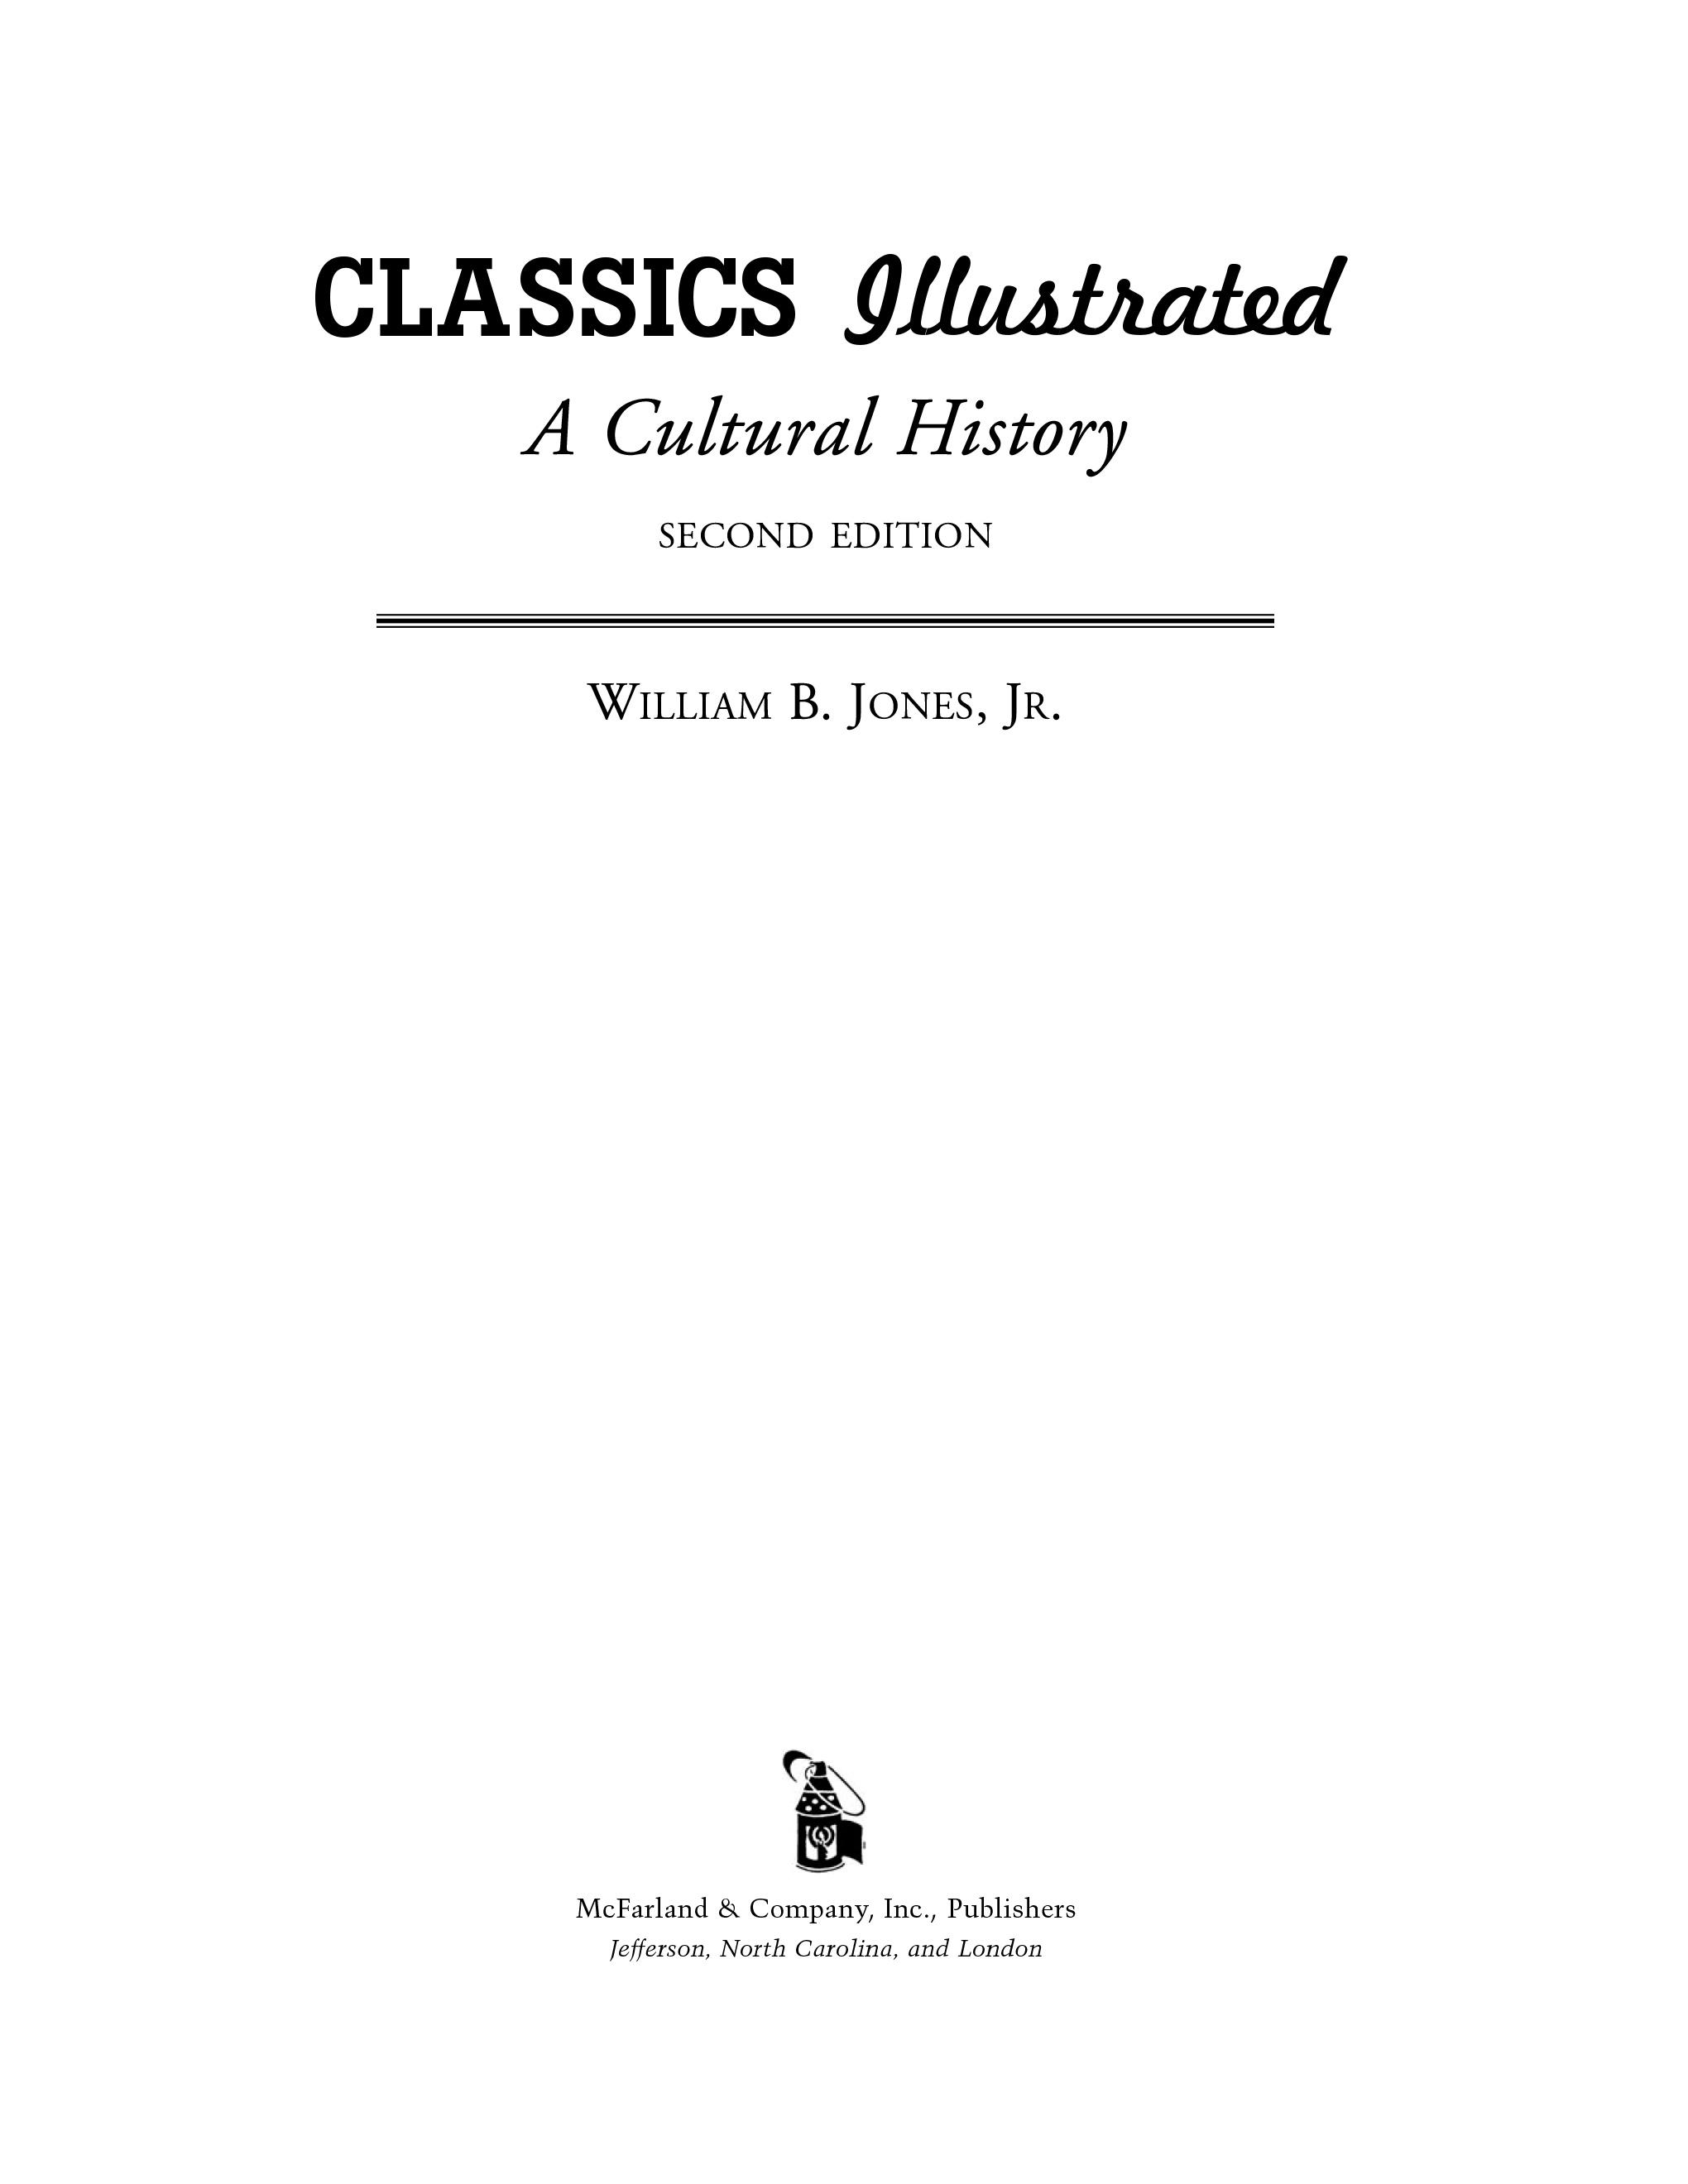 Classics Illustrated: A Cultural History (2011, 2nd Edition): Chapter 1 - Page 4